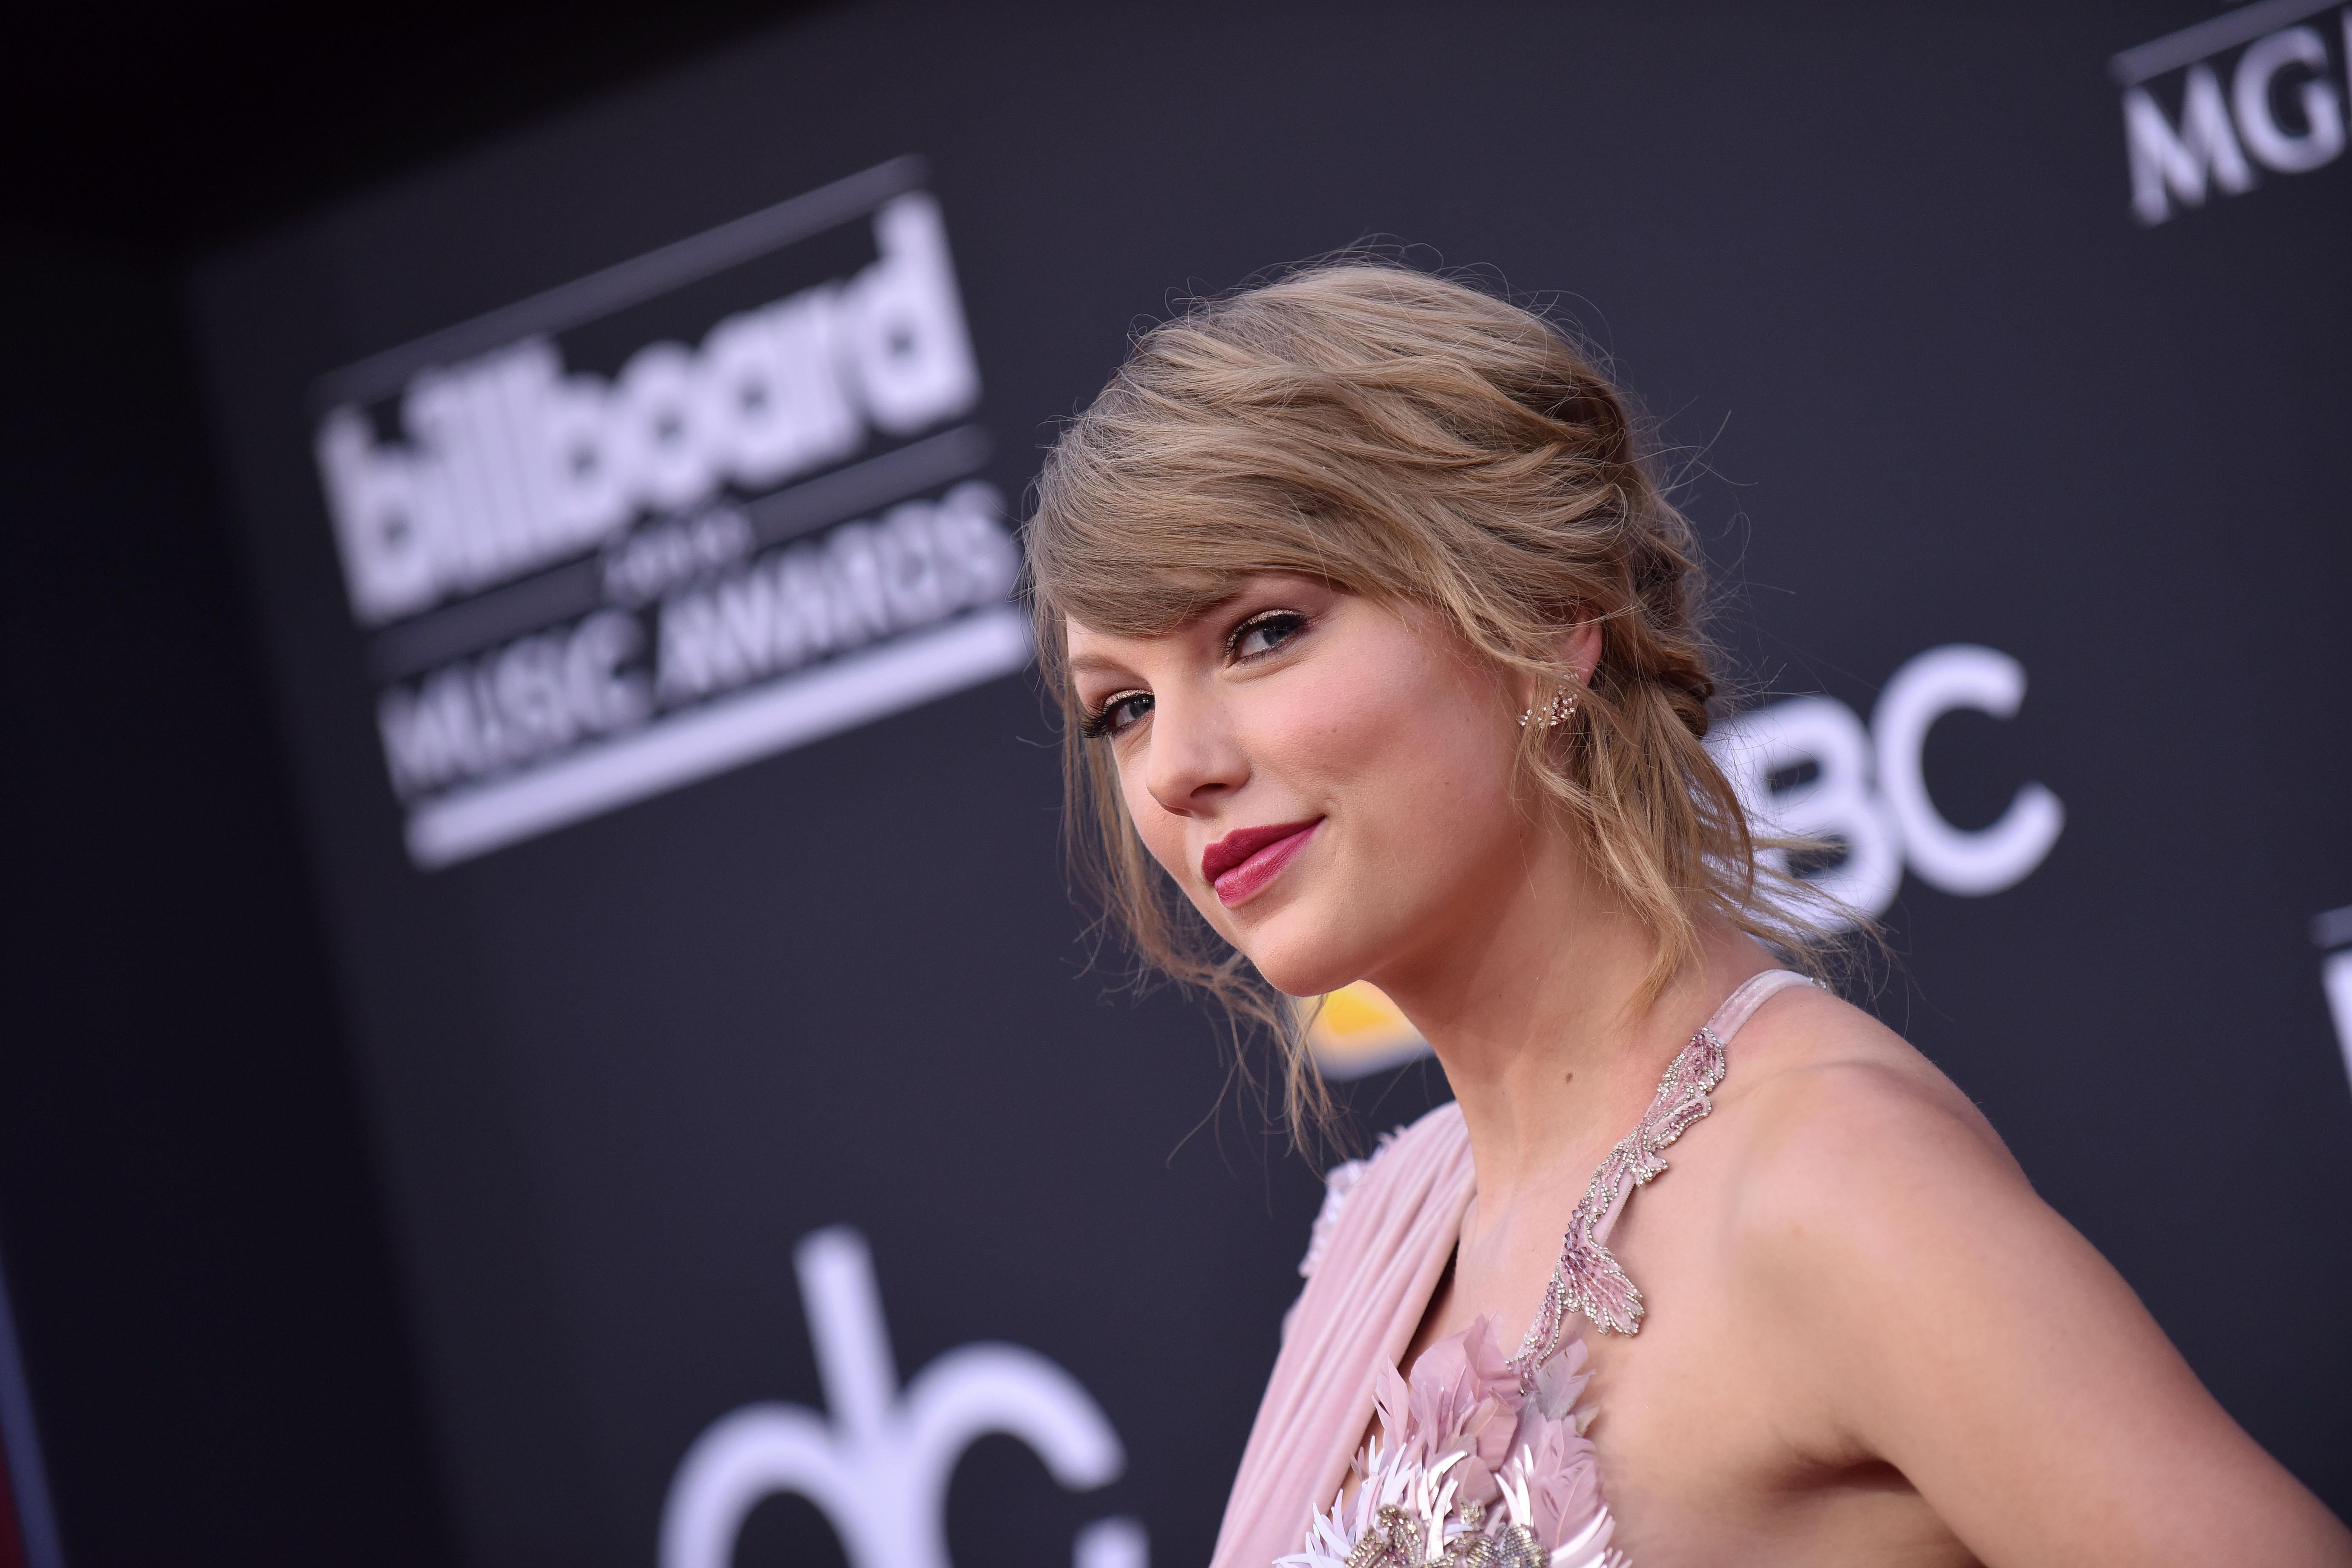 Taylor Swift on the red carpet smirks into the camera.